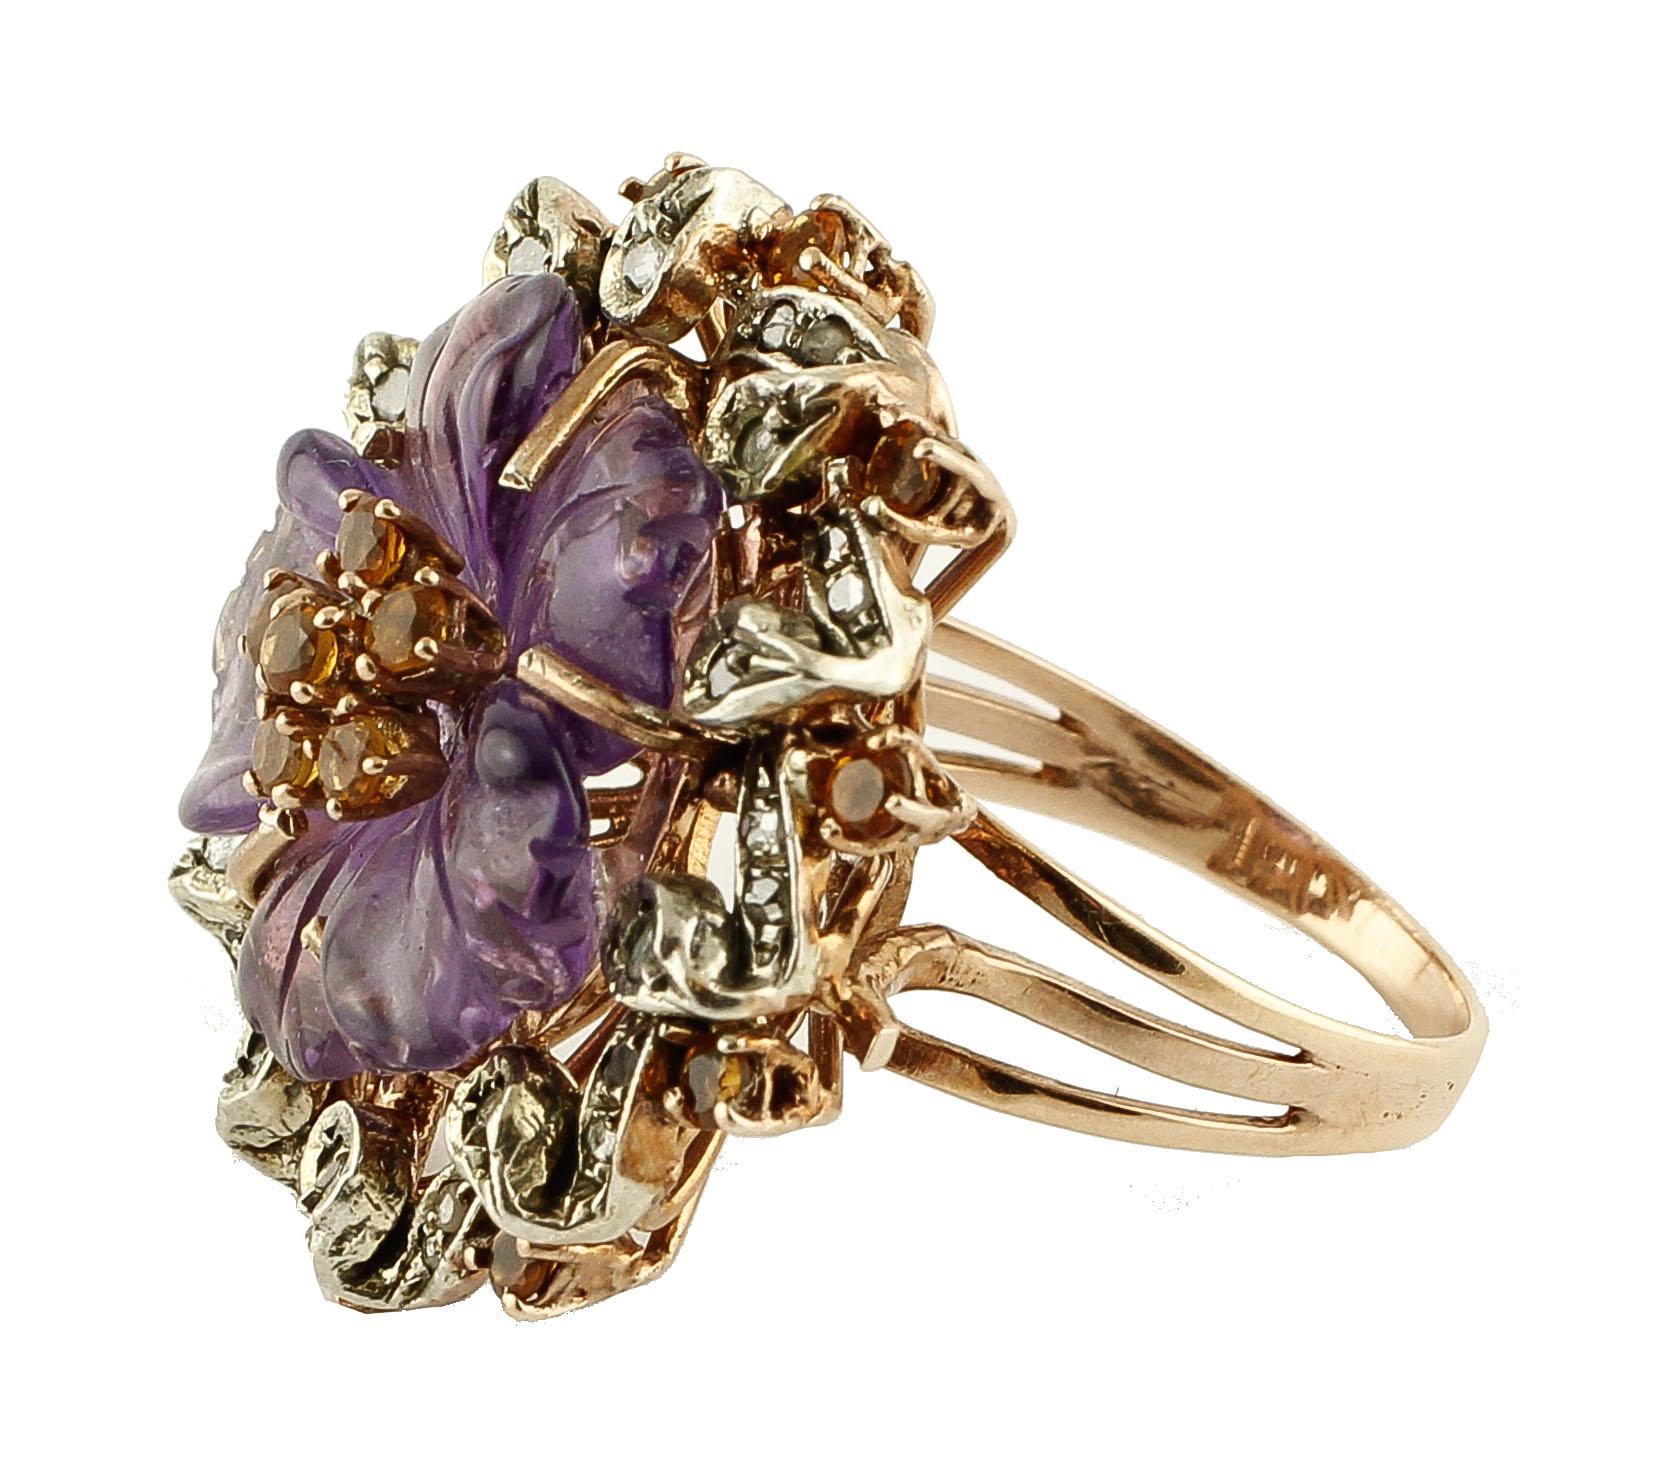 Amazing ring in 9 kt rose gold and silver, 2.8 cm in diameter, embellished with a central amethyst of 1.80 g, 0.38 ct of diamonds and 0.73 ct of blue sapphires. 
Diamond ct 0.38
Blue Sapphire ct 0.73
Amethyst g 1.80
Italian size 17
French size